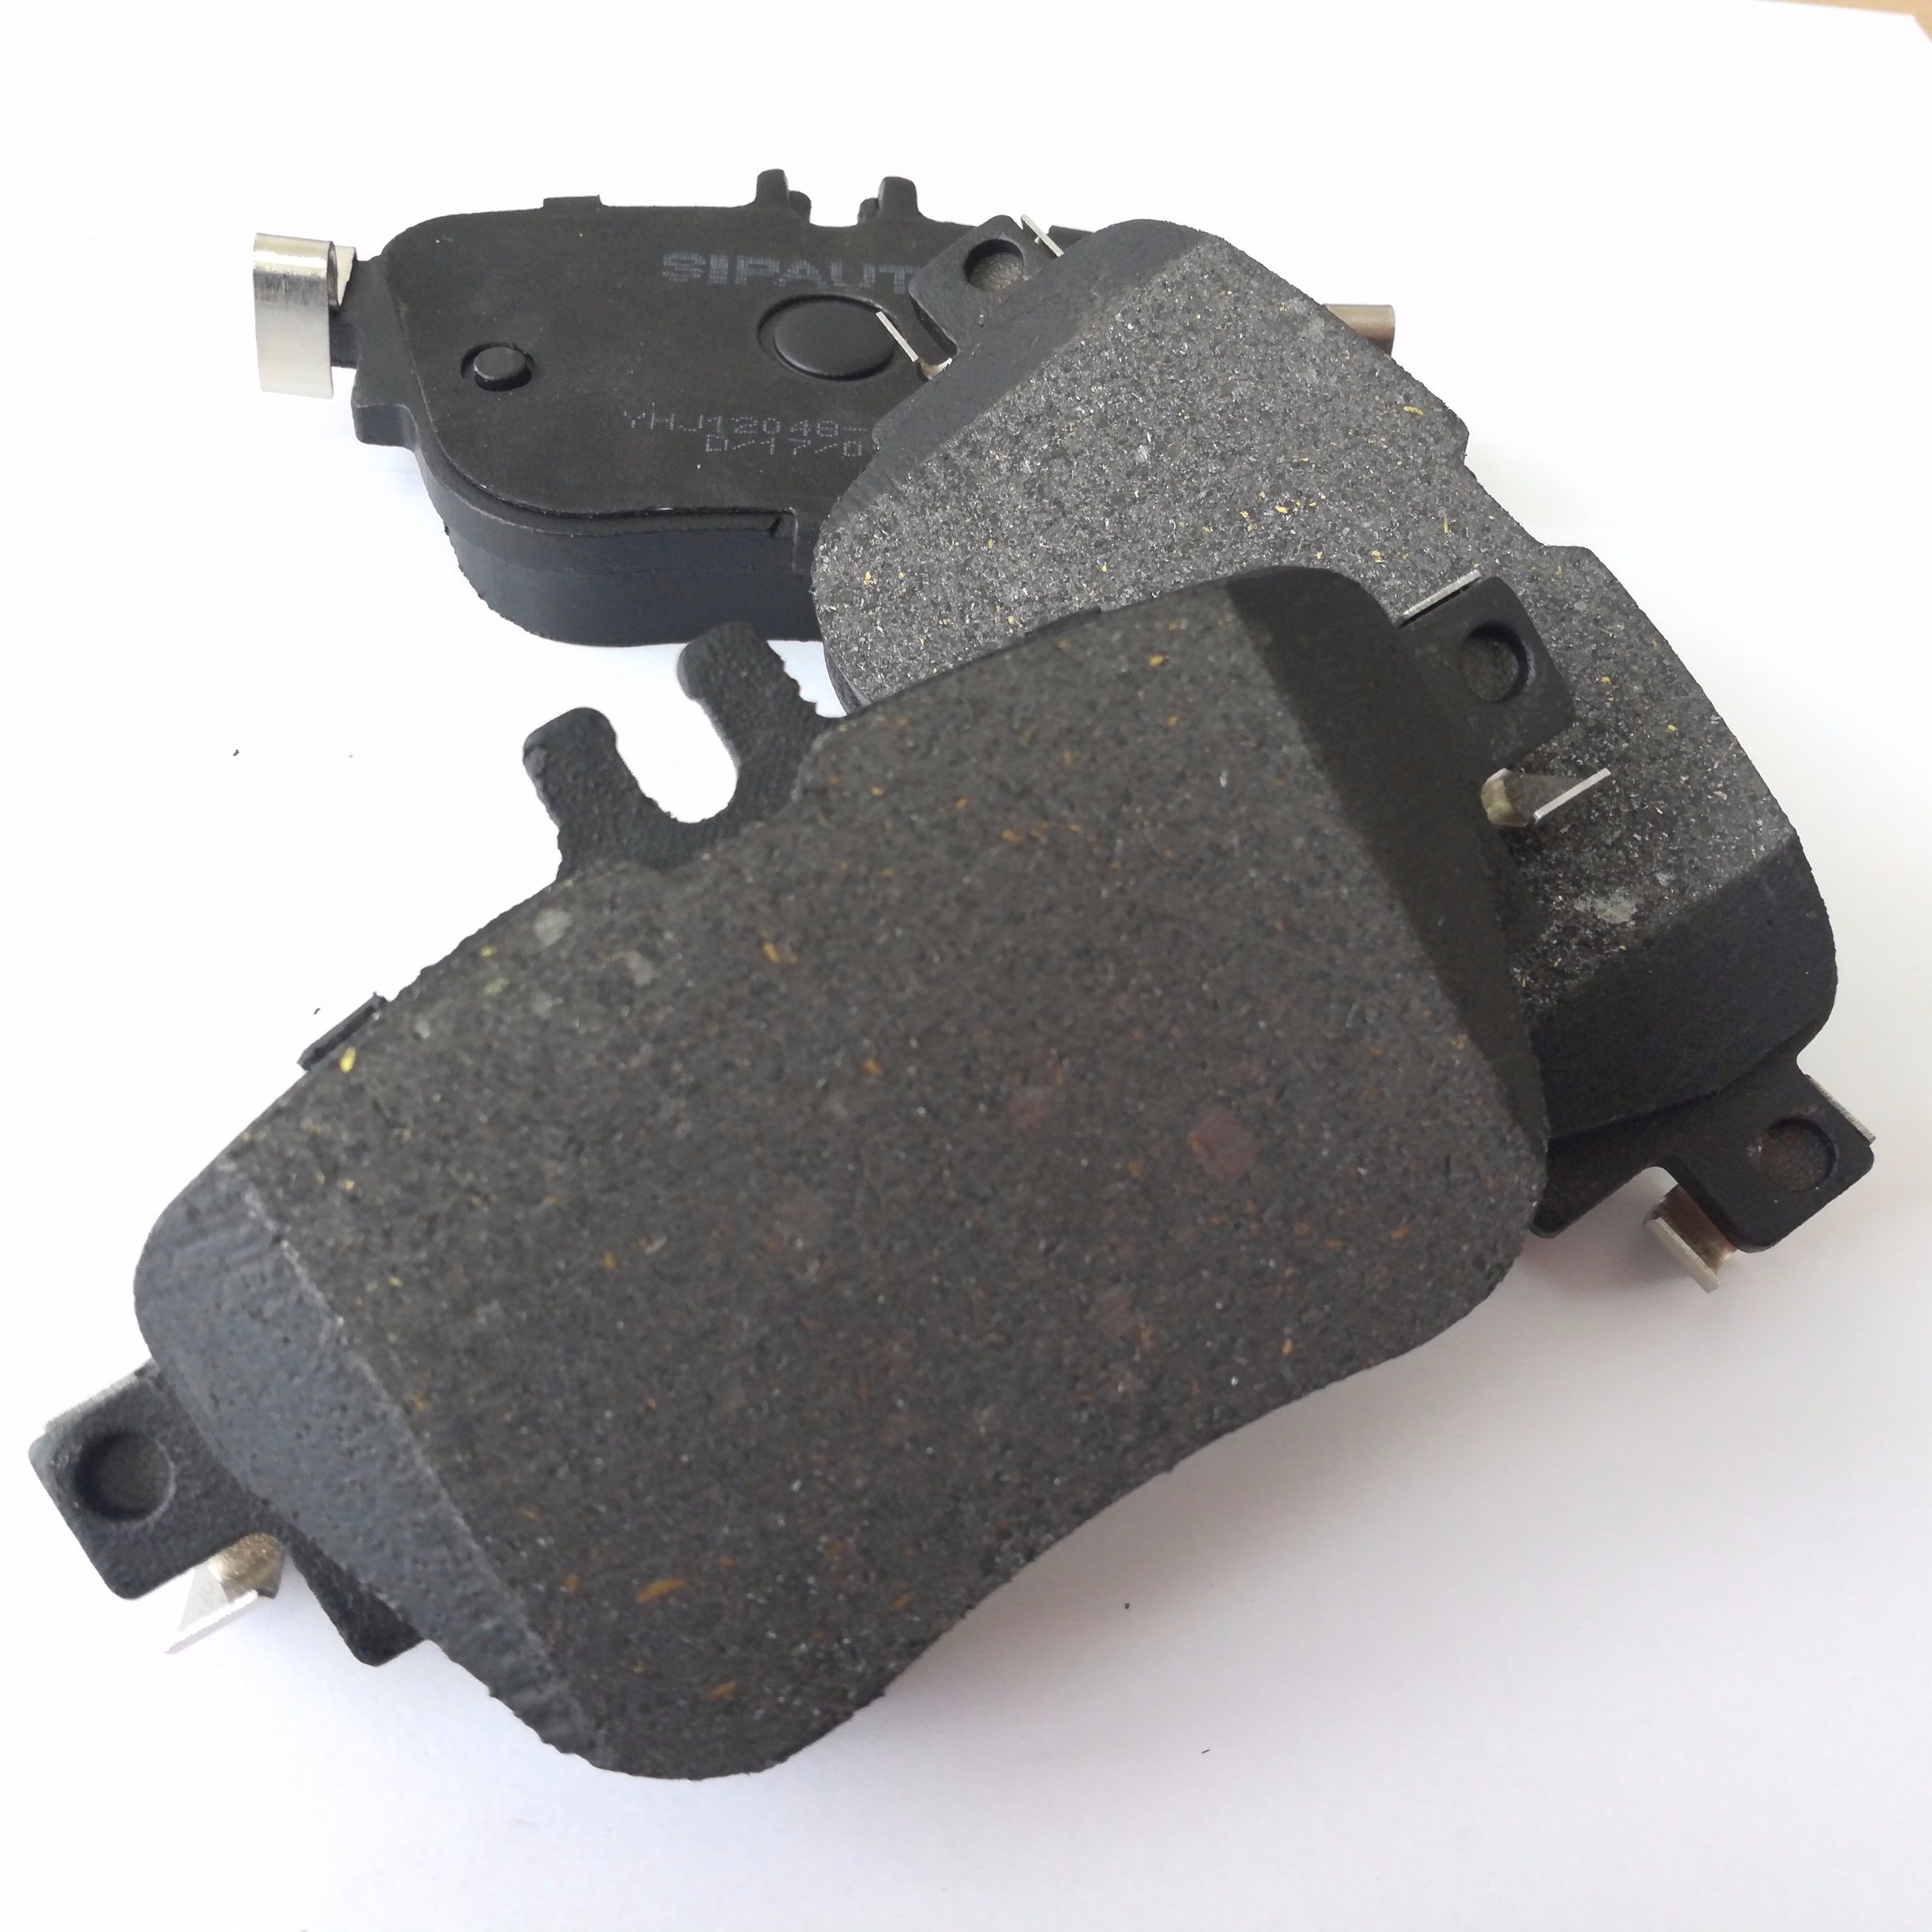 Car Auto Part No. D1453 Rear Brake Pads for Volkswagen OE 958.352.939.00 Brake Pads